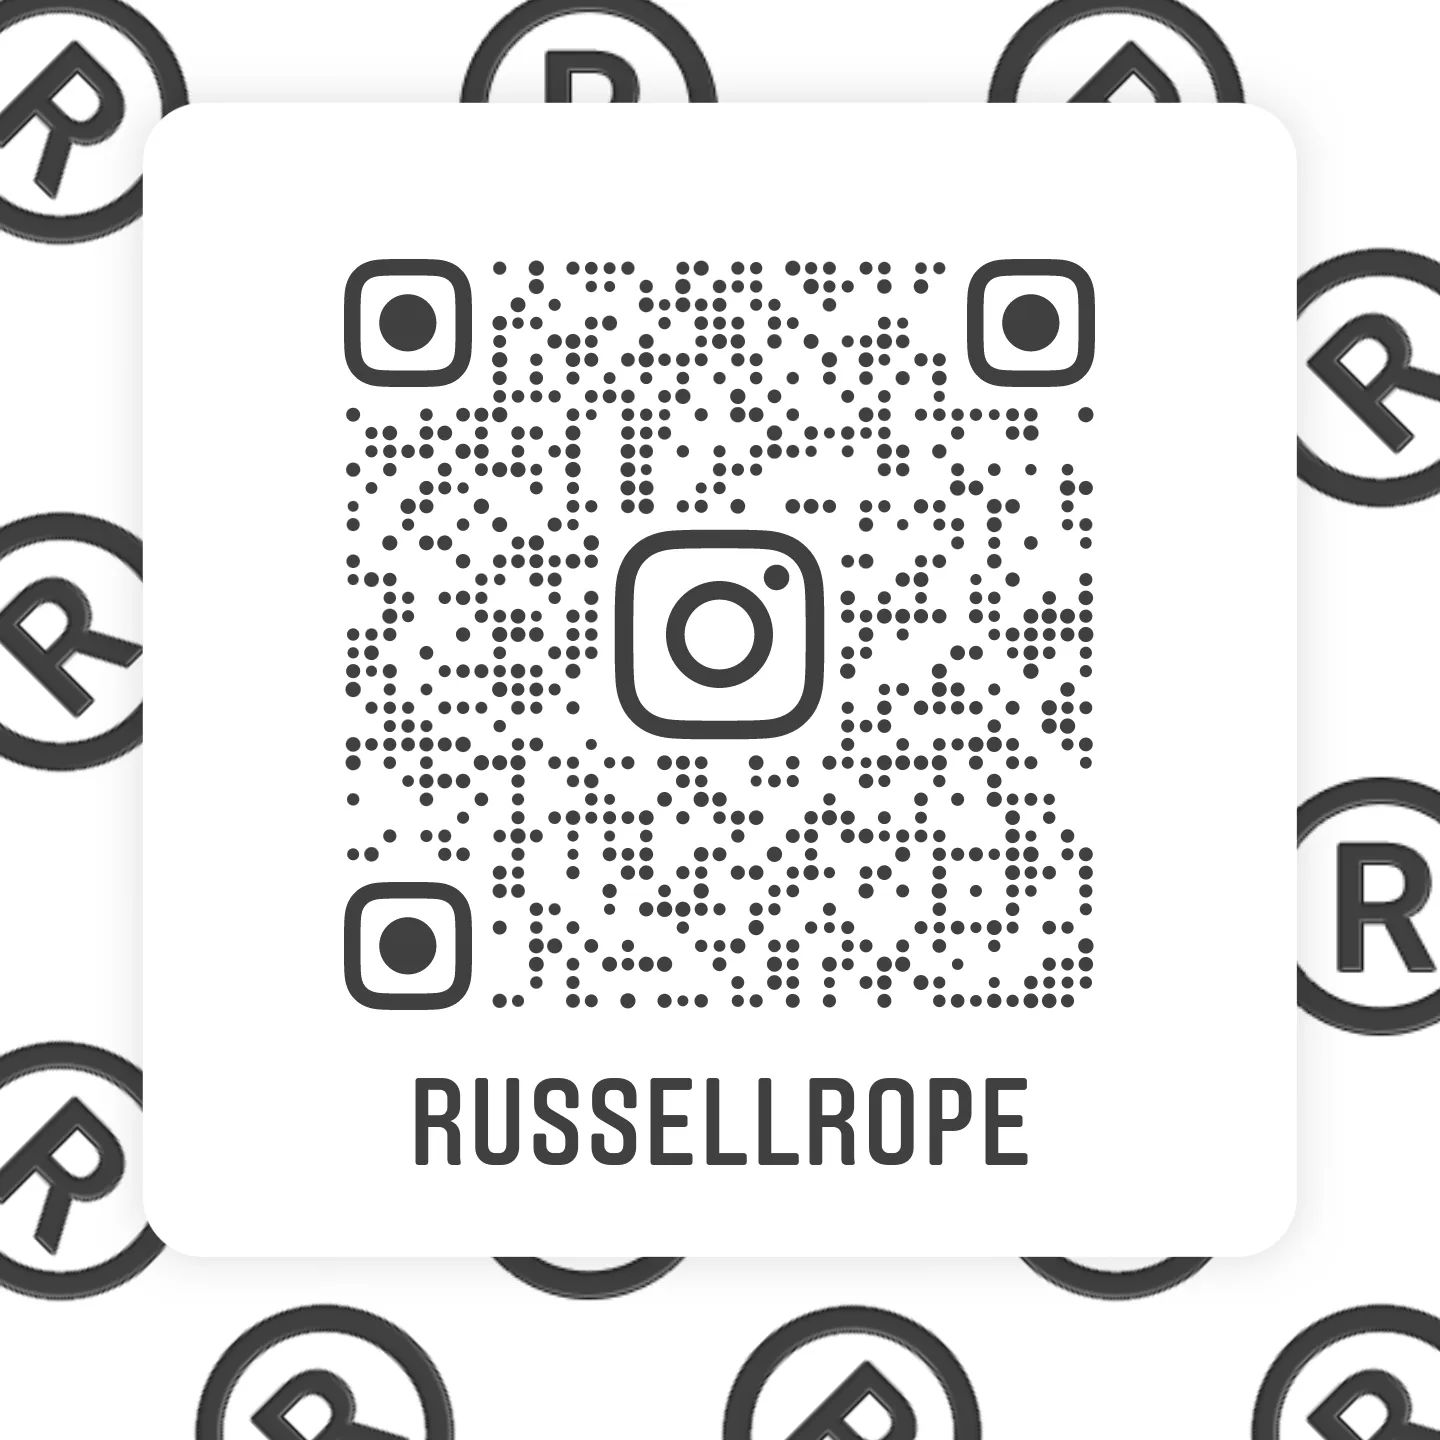 ReTuRNt tO tHe GRaM; "They" FinaLLY aPPRoVed RR Shop #iNstaGRam @RussellRope @ https://russellrope.com/tag/socialmedia 📸📲🖼🎞
.
.
.
.
#swaggy #design #art #entertainment #lifestyle #apparel #creator #steez #eyecandy #clothing #hollywood #losangeles #hwood #california #nightclub #create #lit #style #fashion  #trendy #space #astro #creative #socialmedia #ecommerce #elite #astro #style